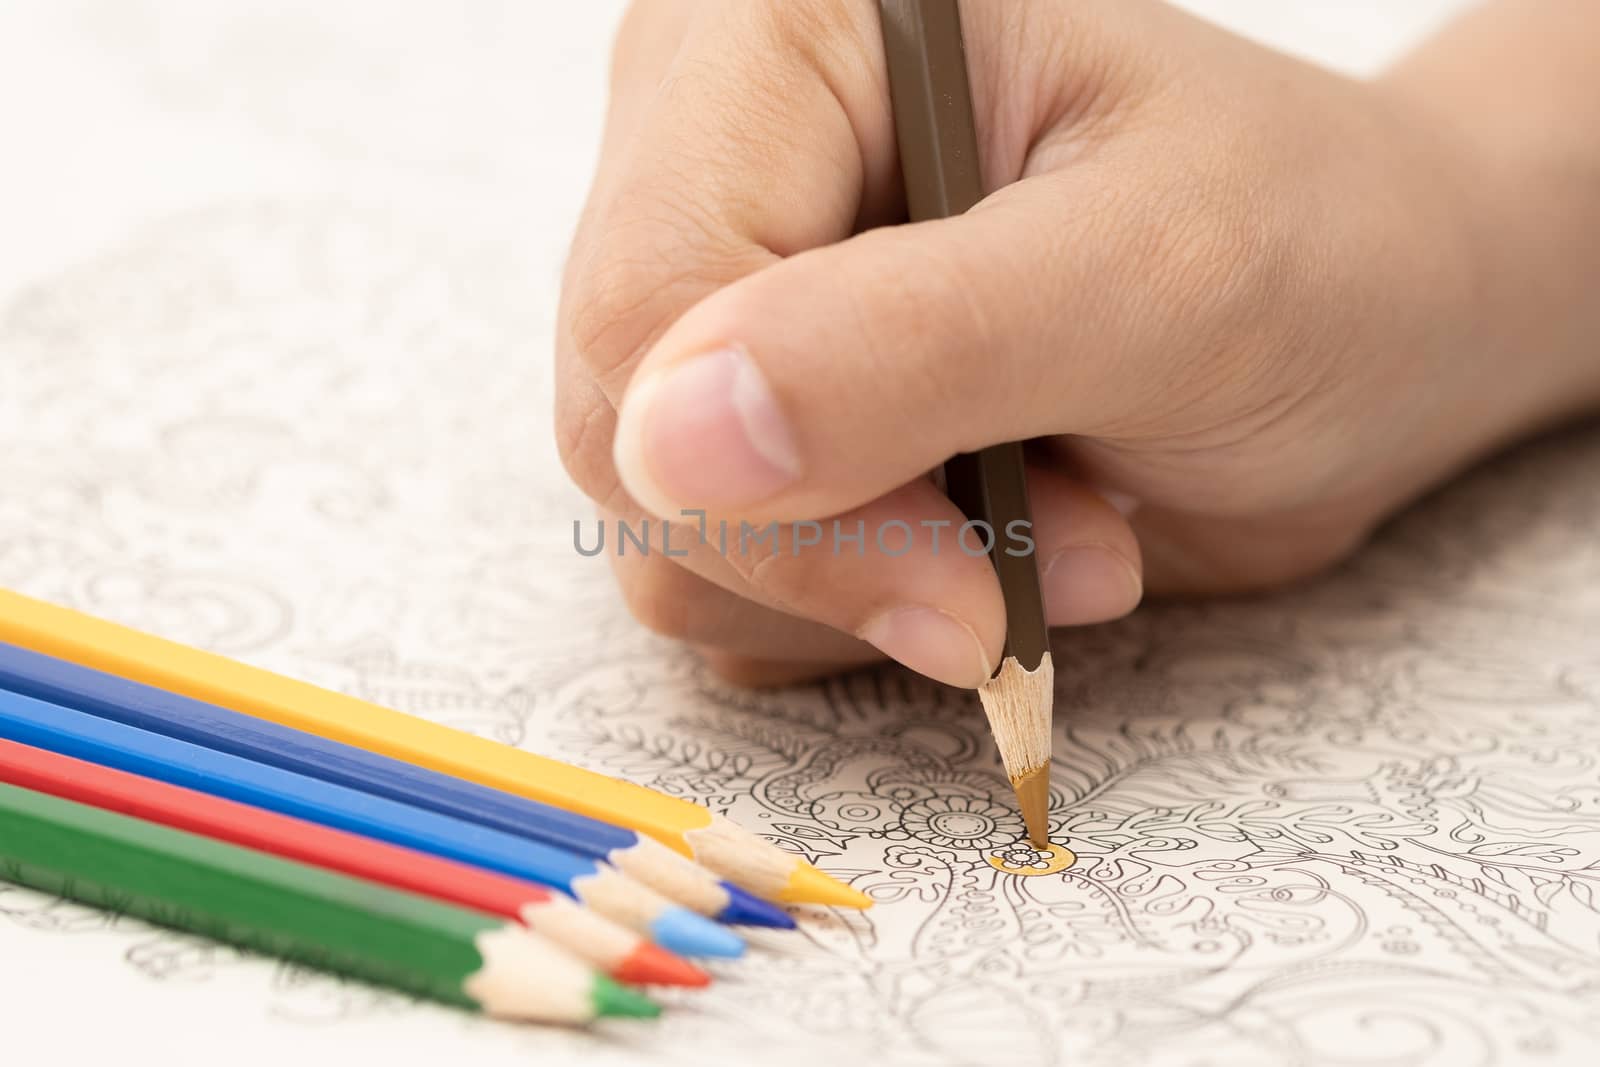 Female hand with colorful pencil is painting on doodle book.